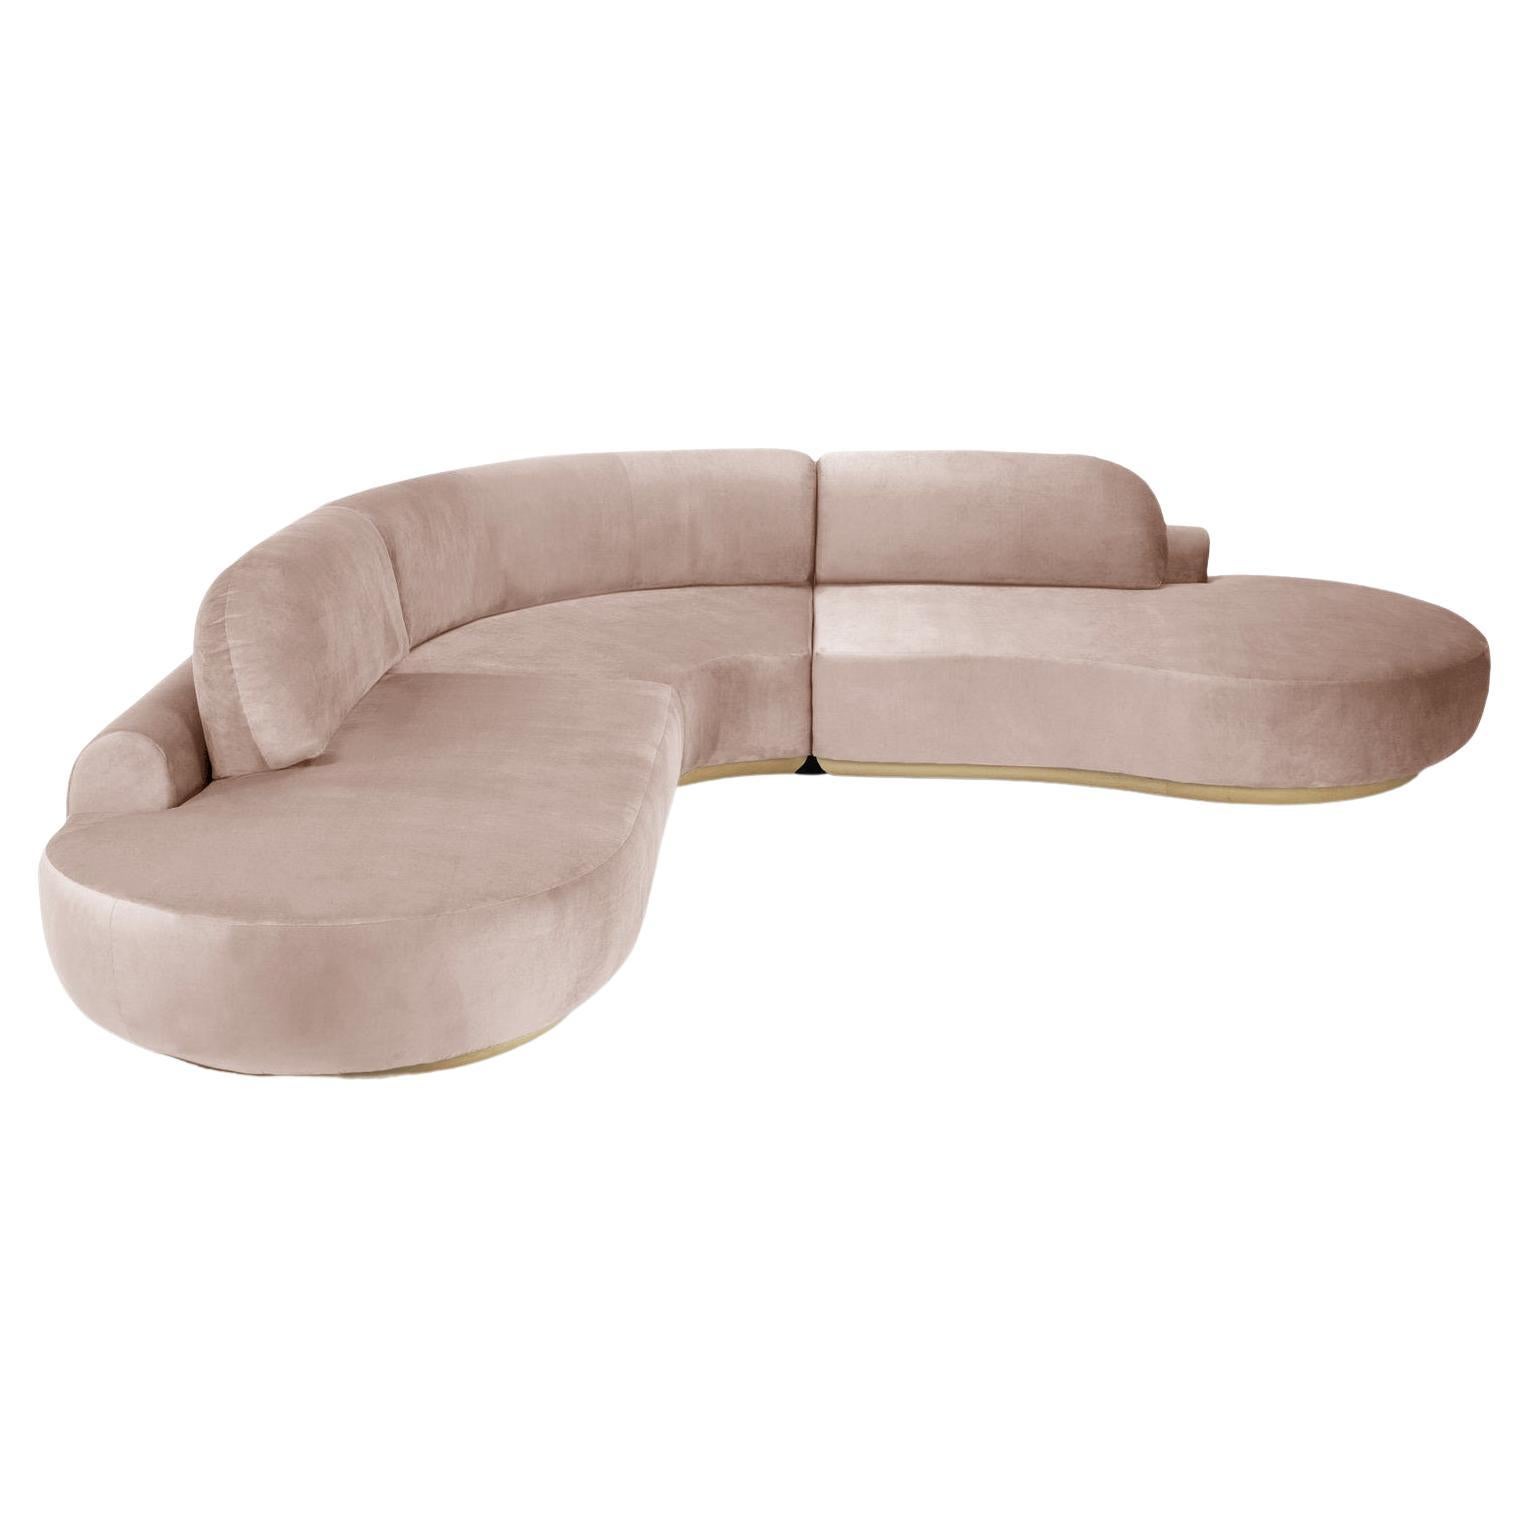 Naked Curved Sectional Sofa, 3 Piece with Natural Oak and Vigo Blossom For Sale